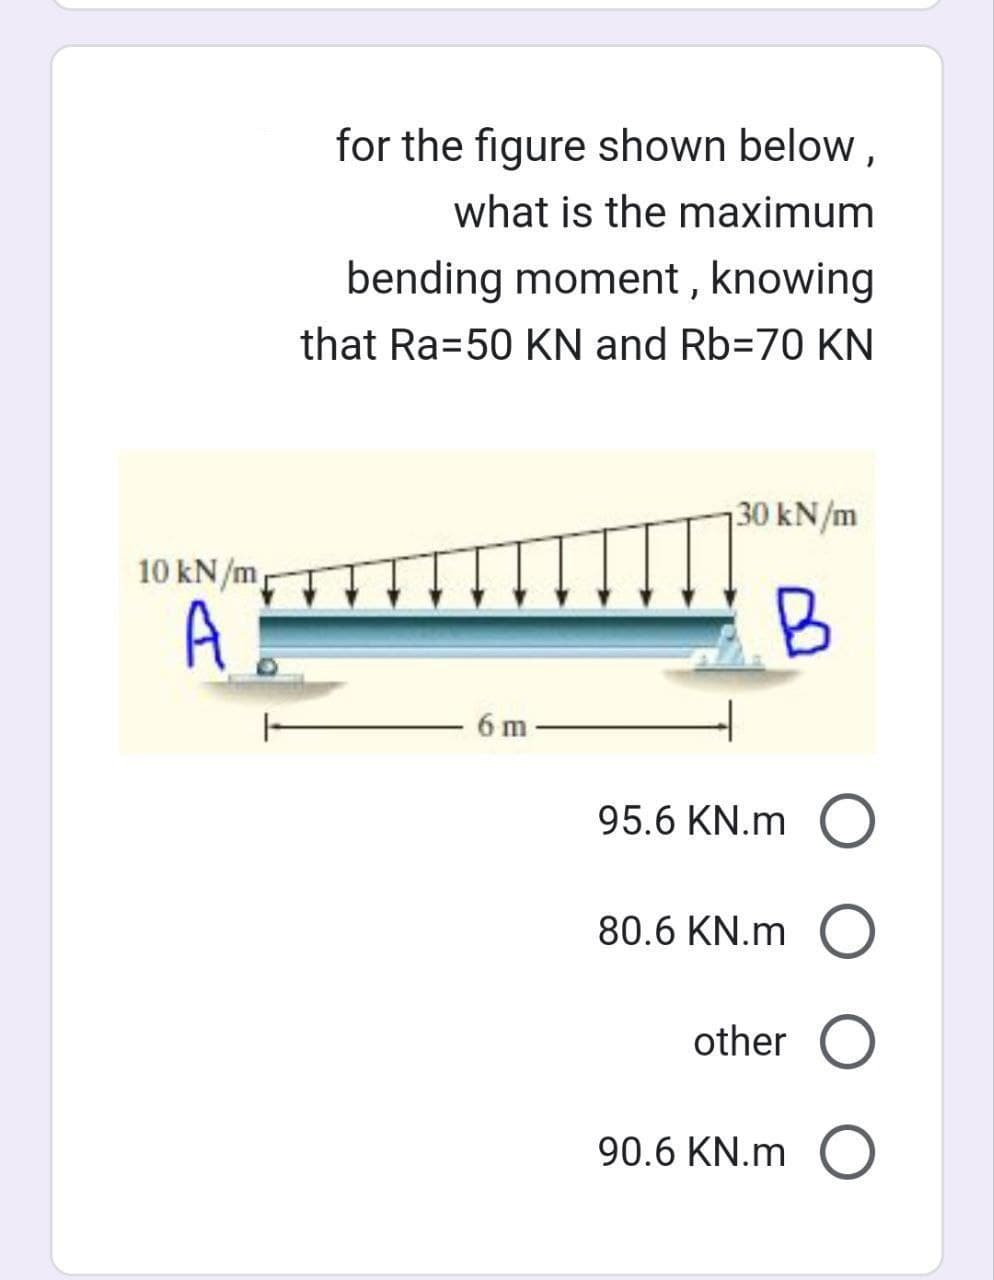 for the figure shown below,
what is the maximum
bending moment, knowing
that Ra=50 KN and Rb-70 KN
10 kN/m
A
6 m
30 kN/m
B
95.6 KN.m O
80.6 KN.m O
other O
90.6 KN.m O